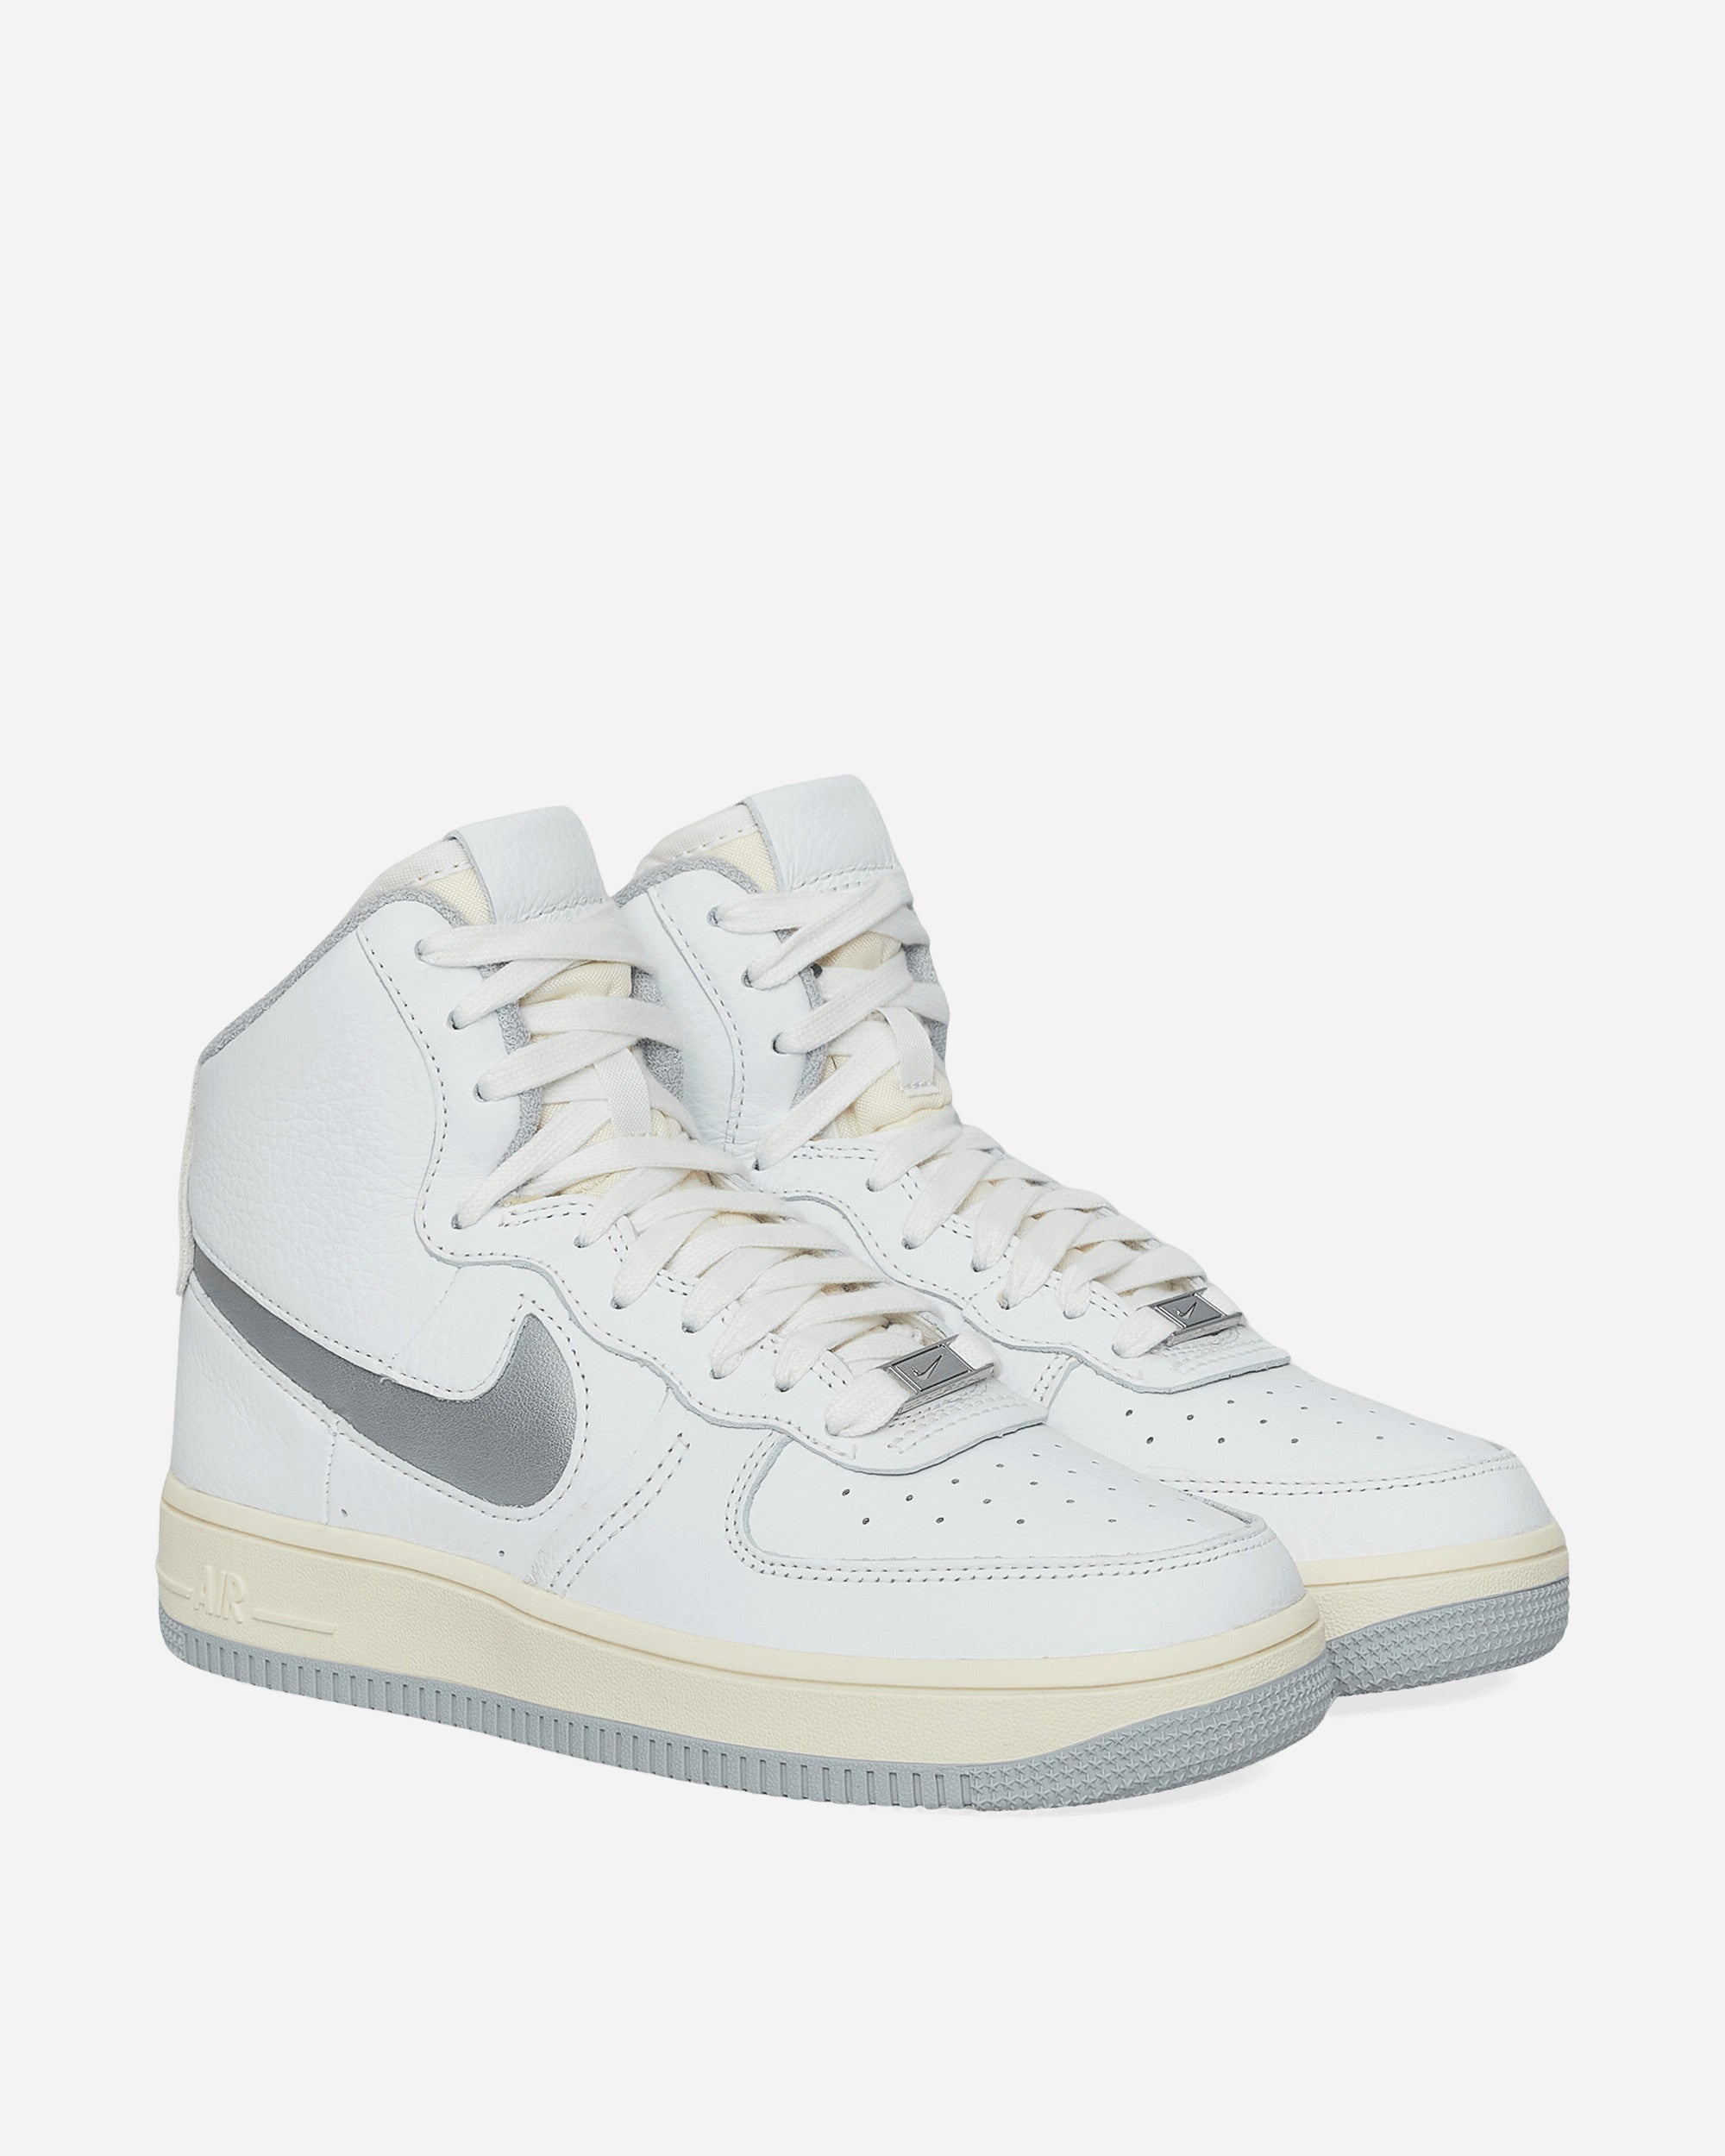 Nike Wmns Af1 Sculpt Summit White/Silver Sneakers High DC3590-101